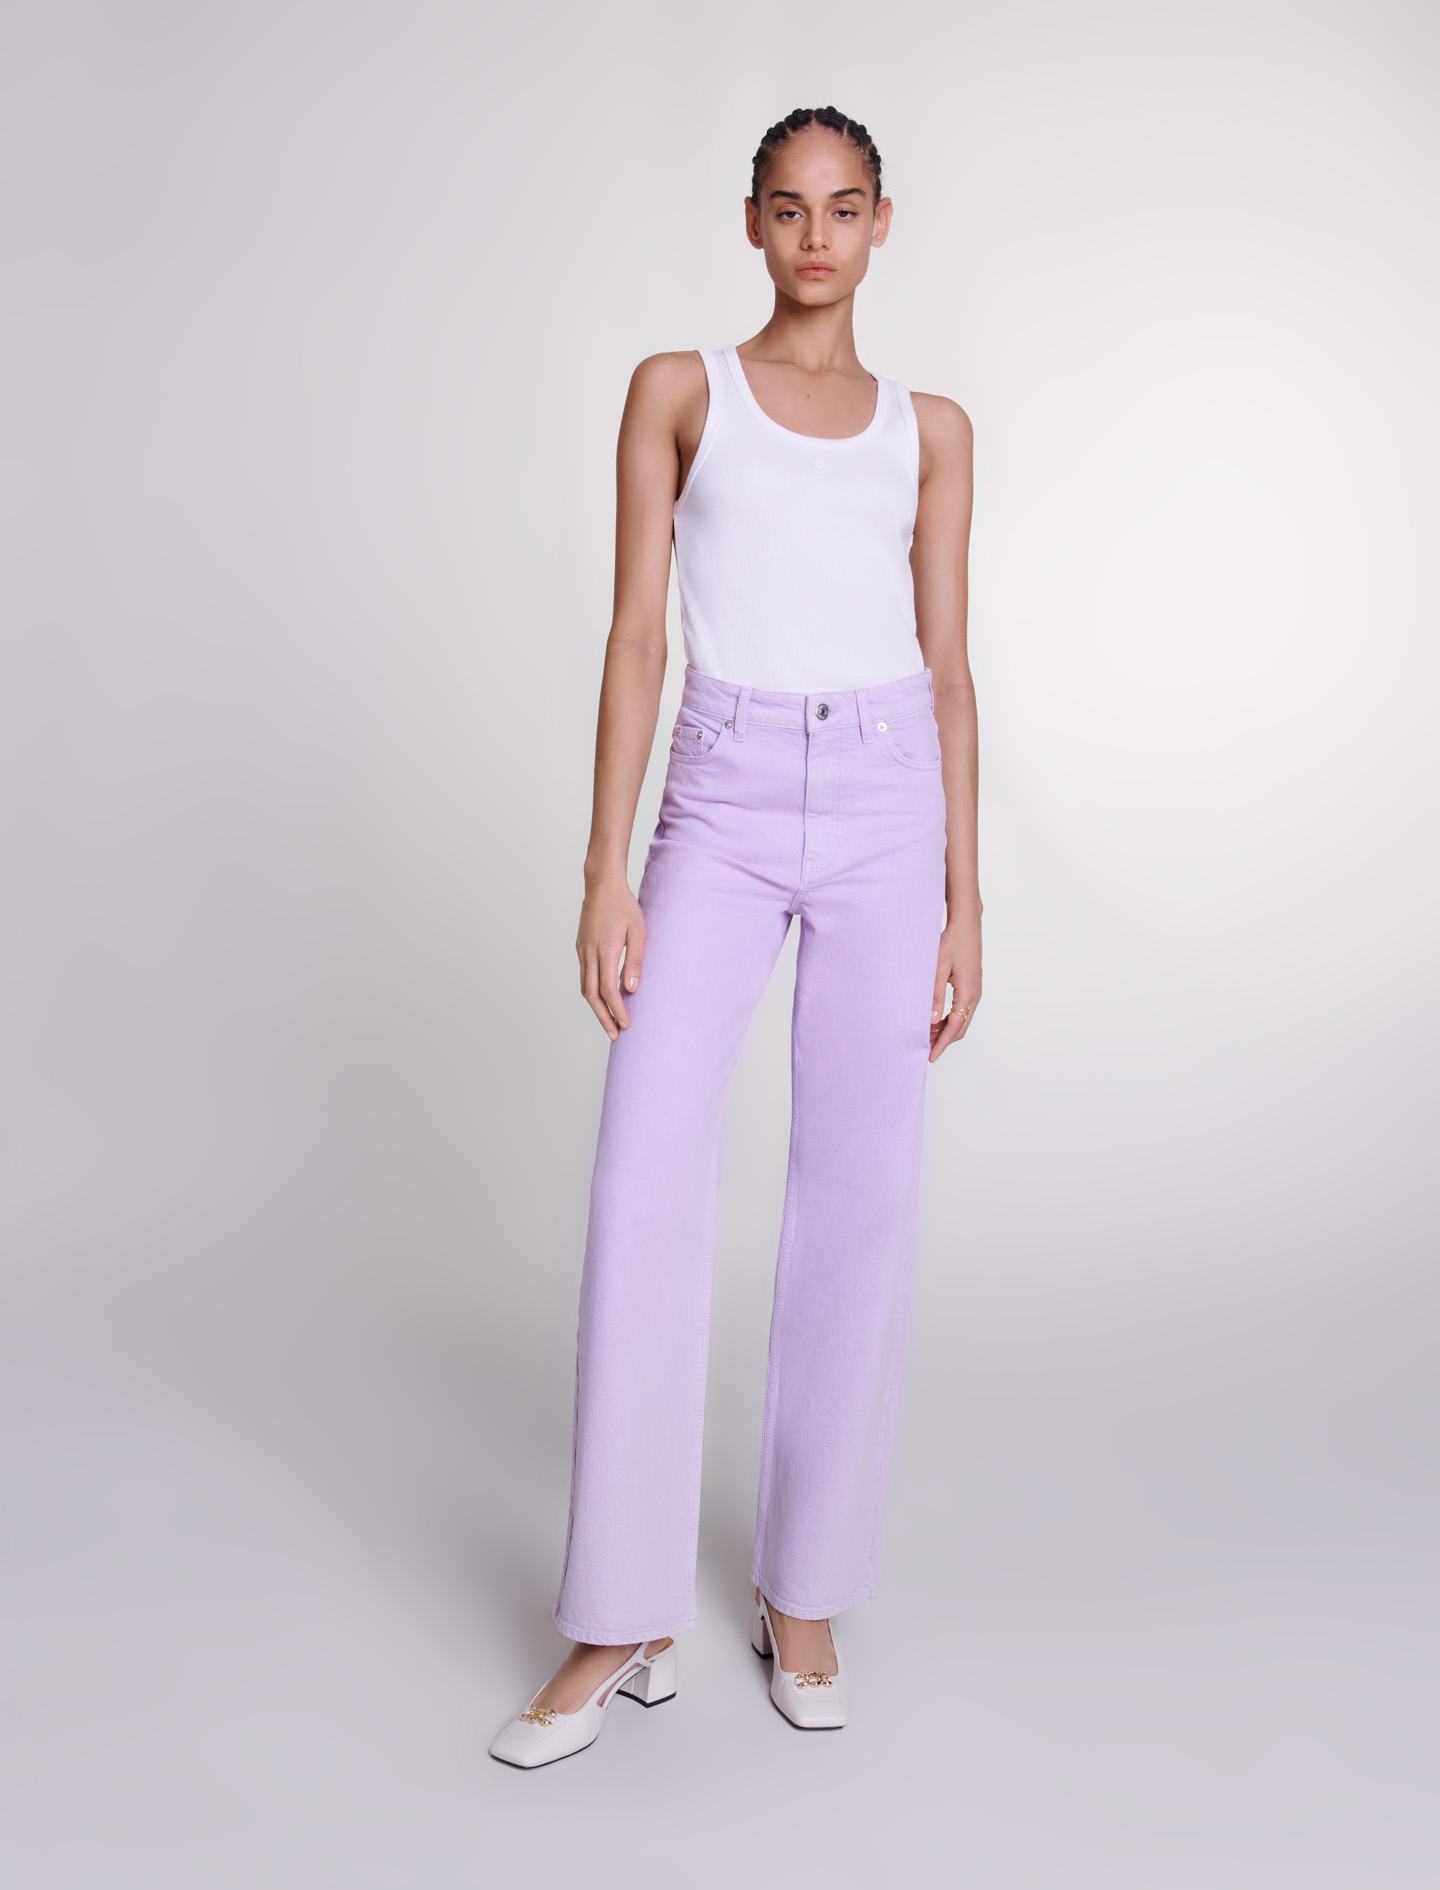 Maje Woman's cotton, Faded wide-leg jeans for Spring/Summer, in color Parma Violet / Red